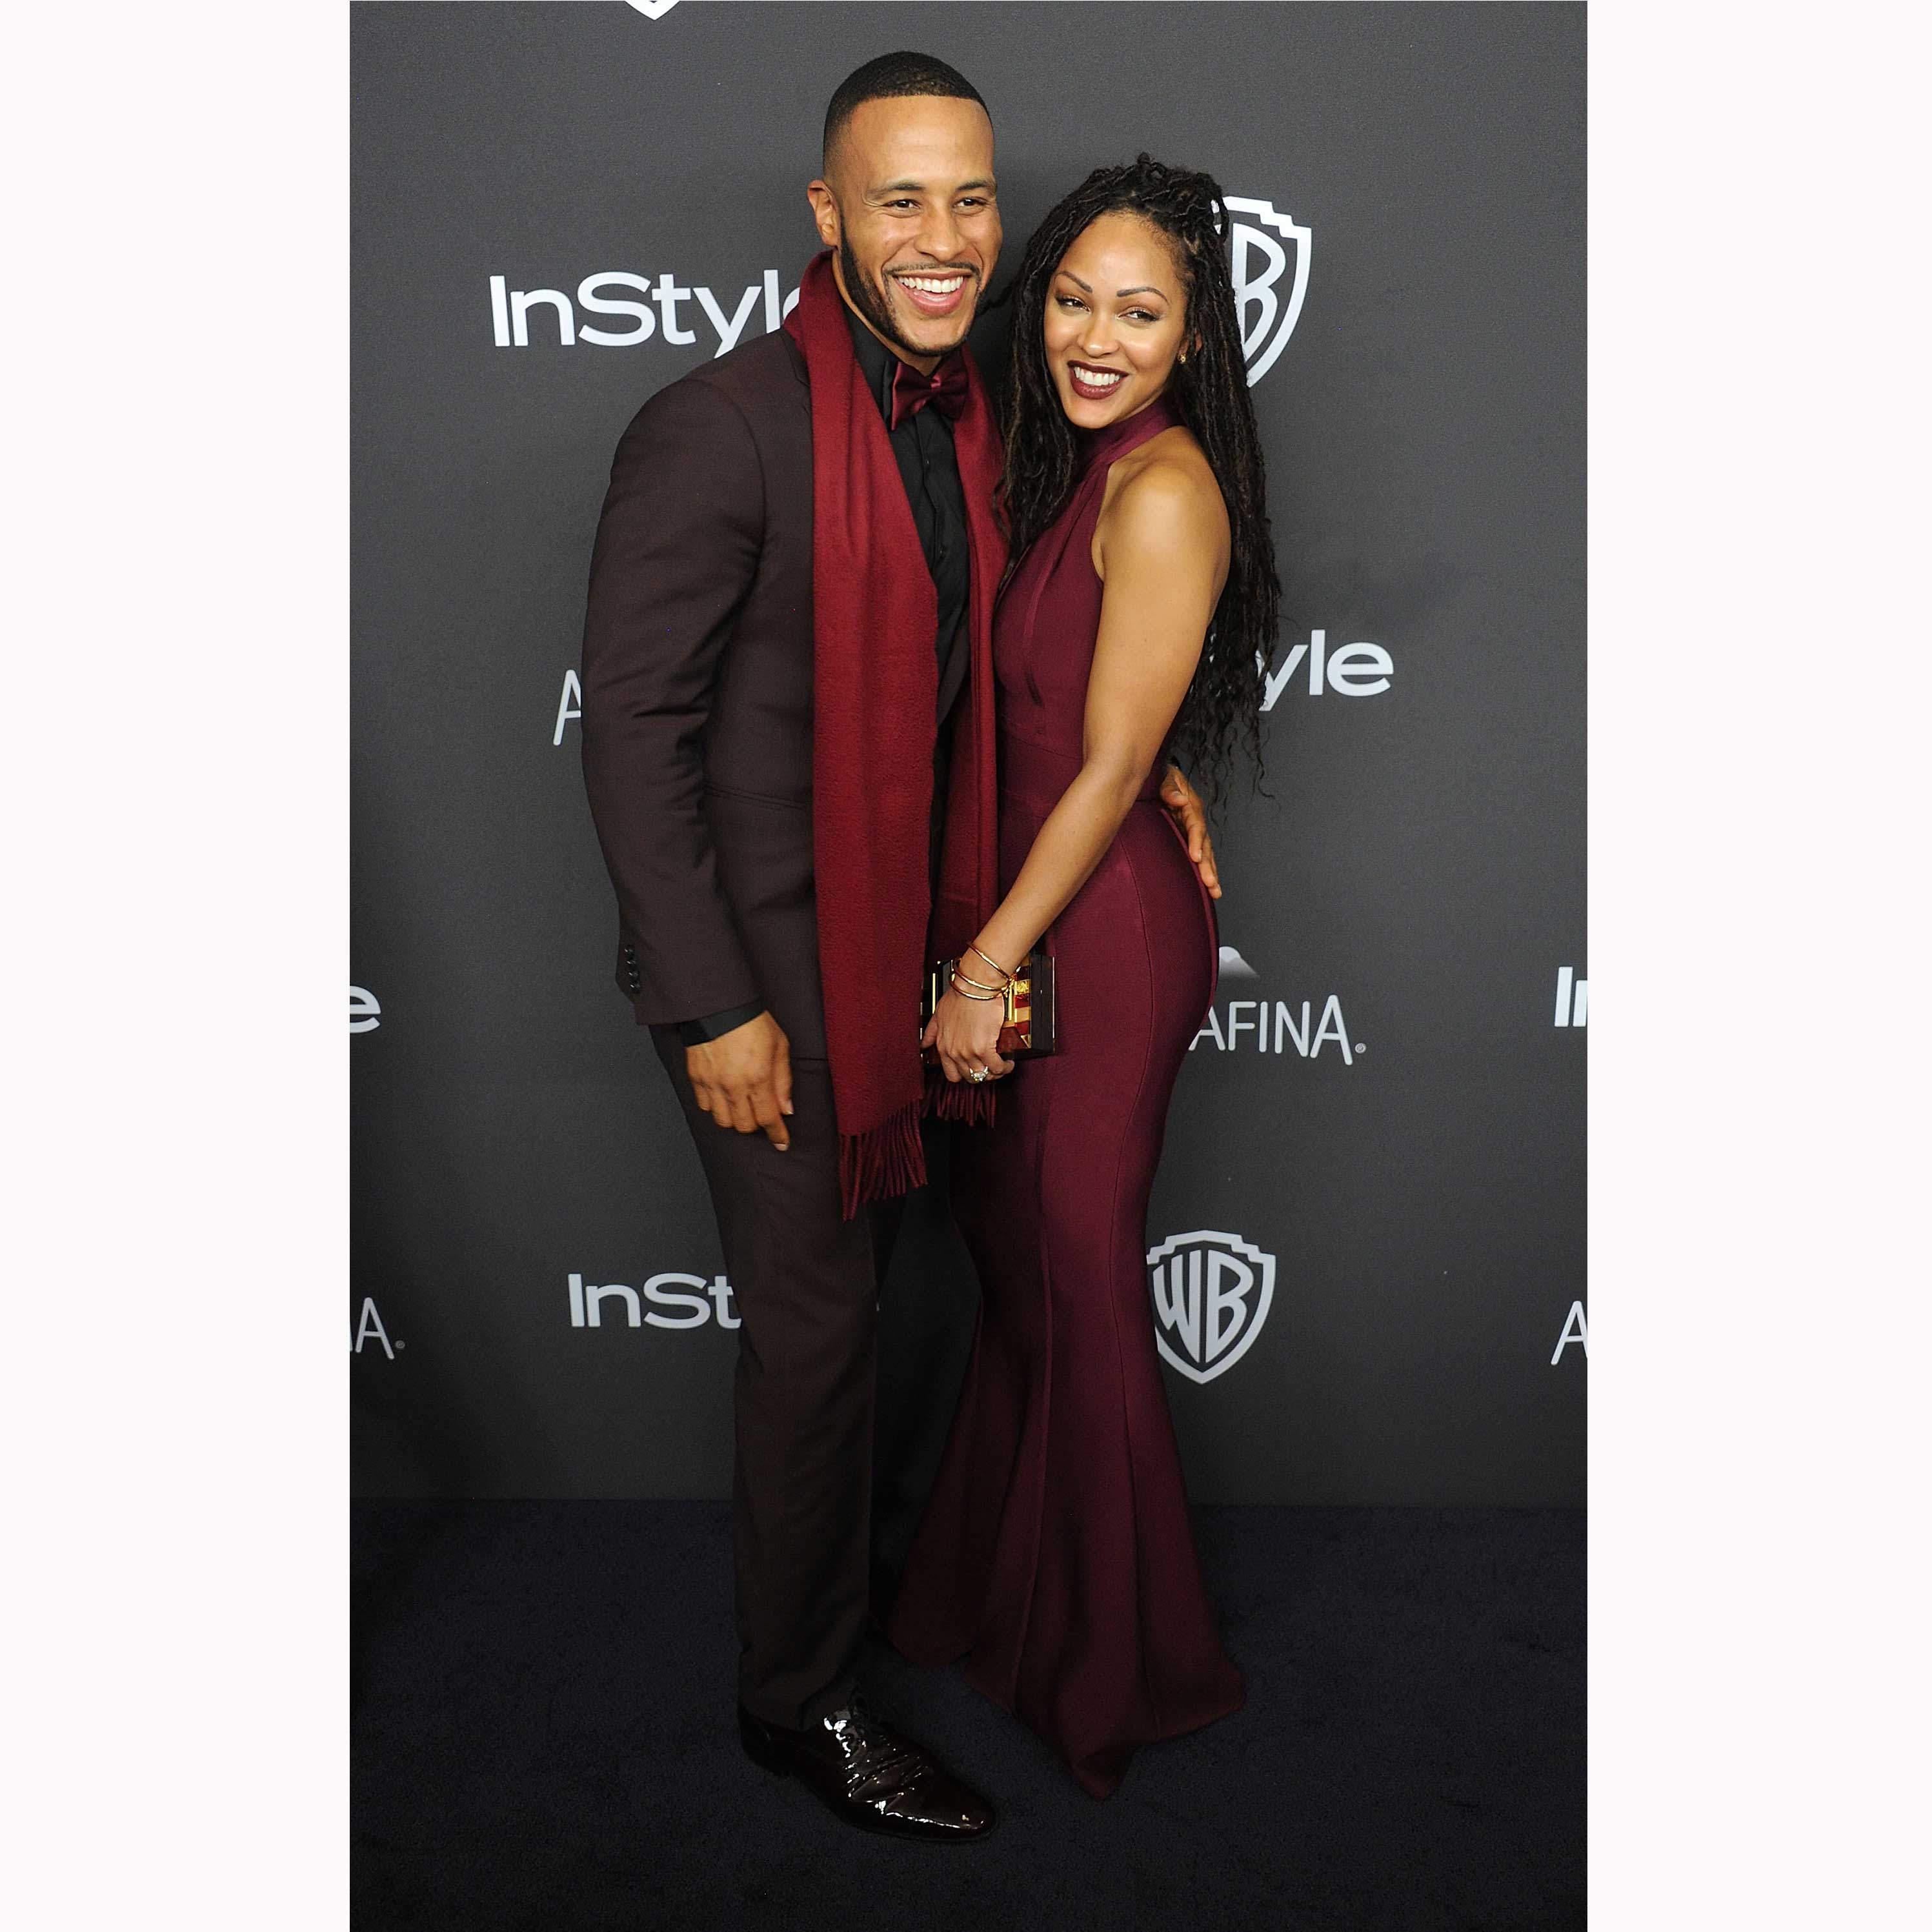 Happy 4th Anniversary! 11 Photos of Meagan Good and DeVon Franklin That Capture Their Love Perfectly
